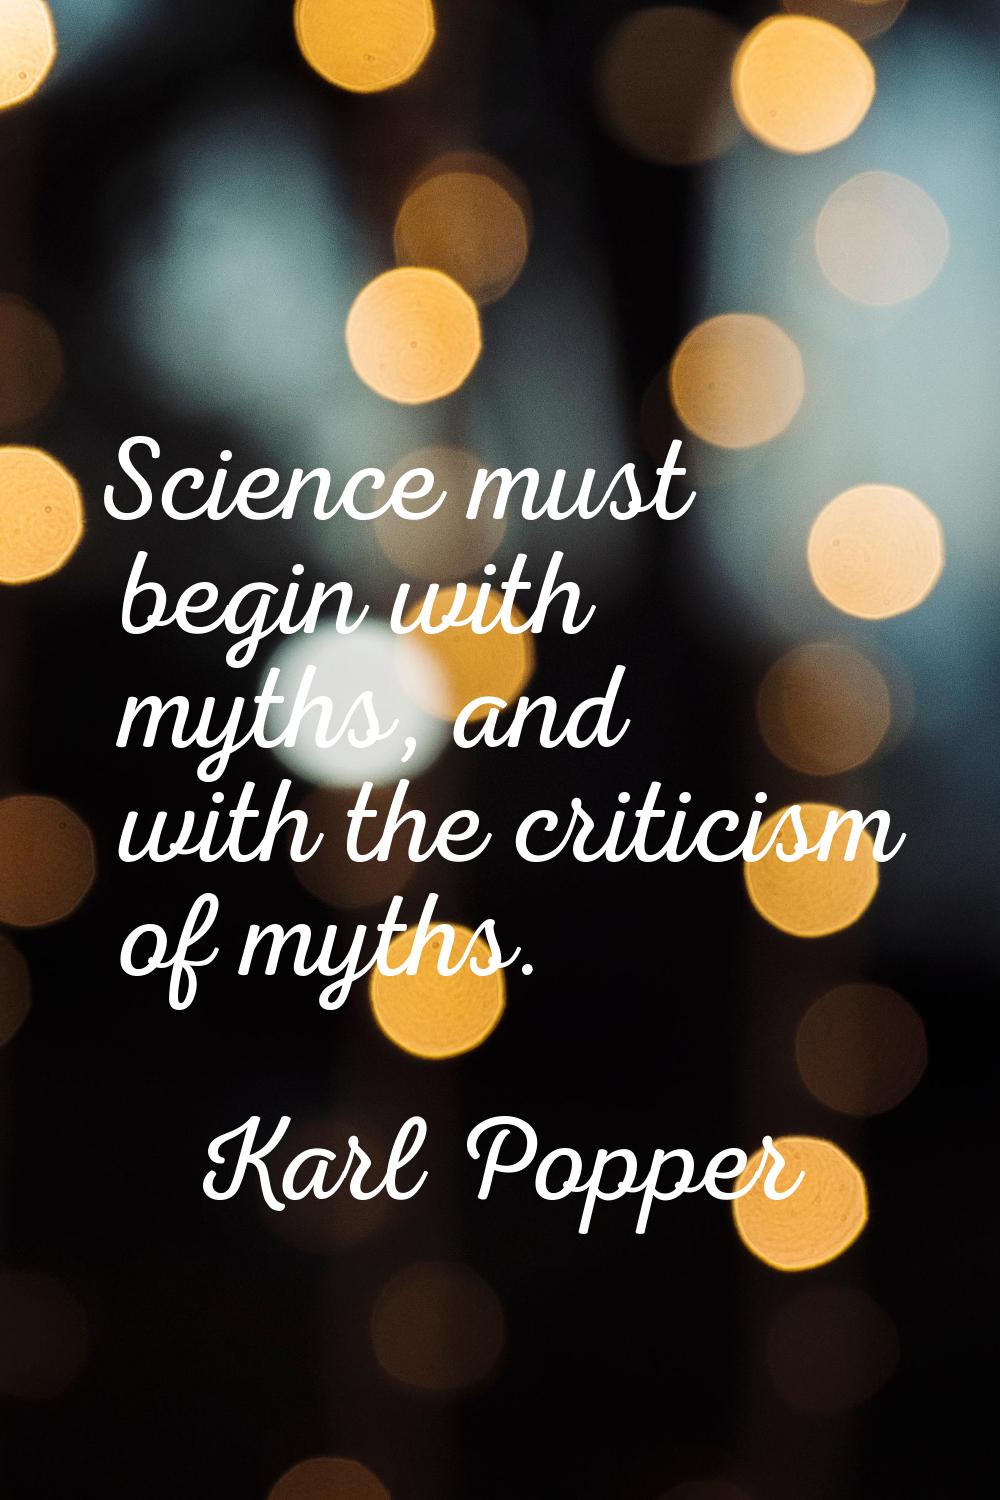 Science must begin with myths, and with the criticism of myths.